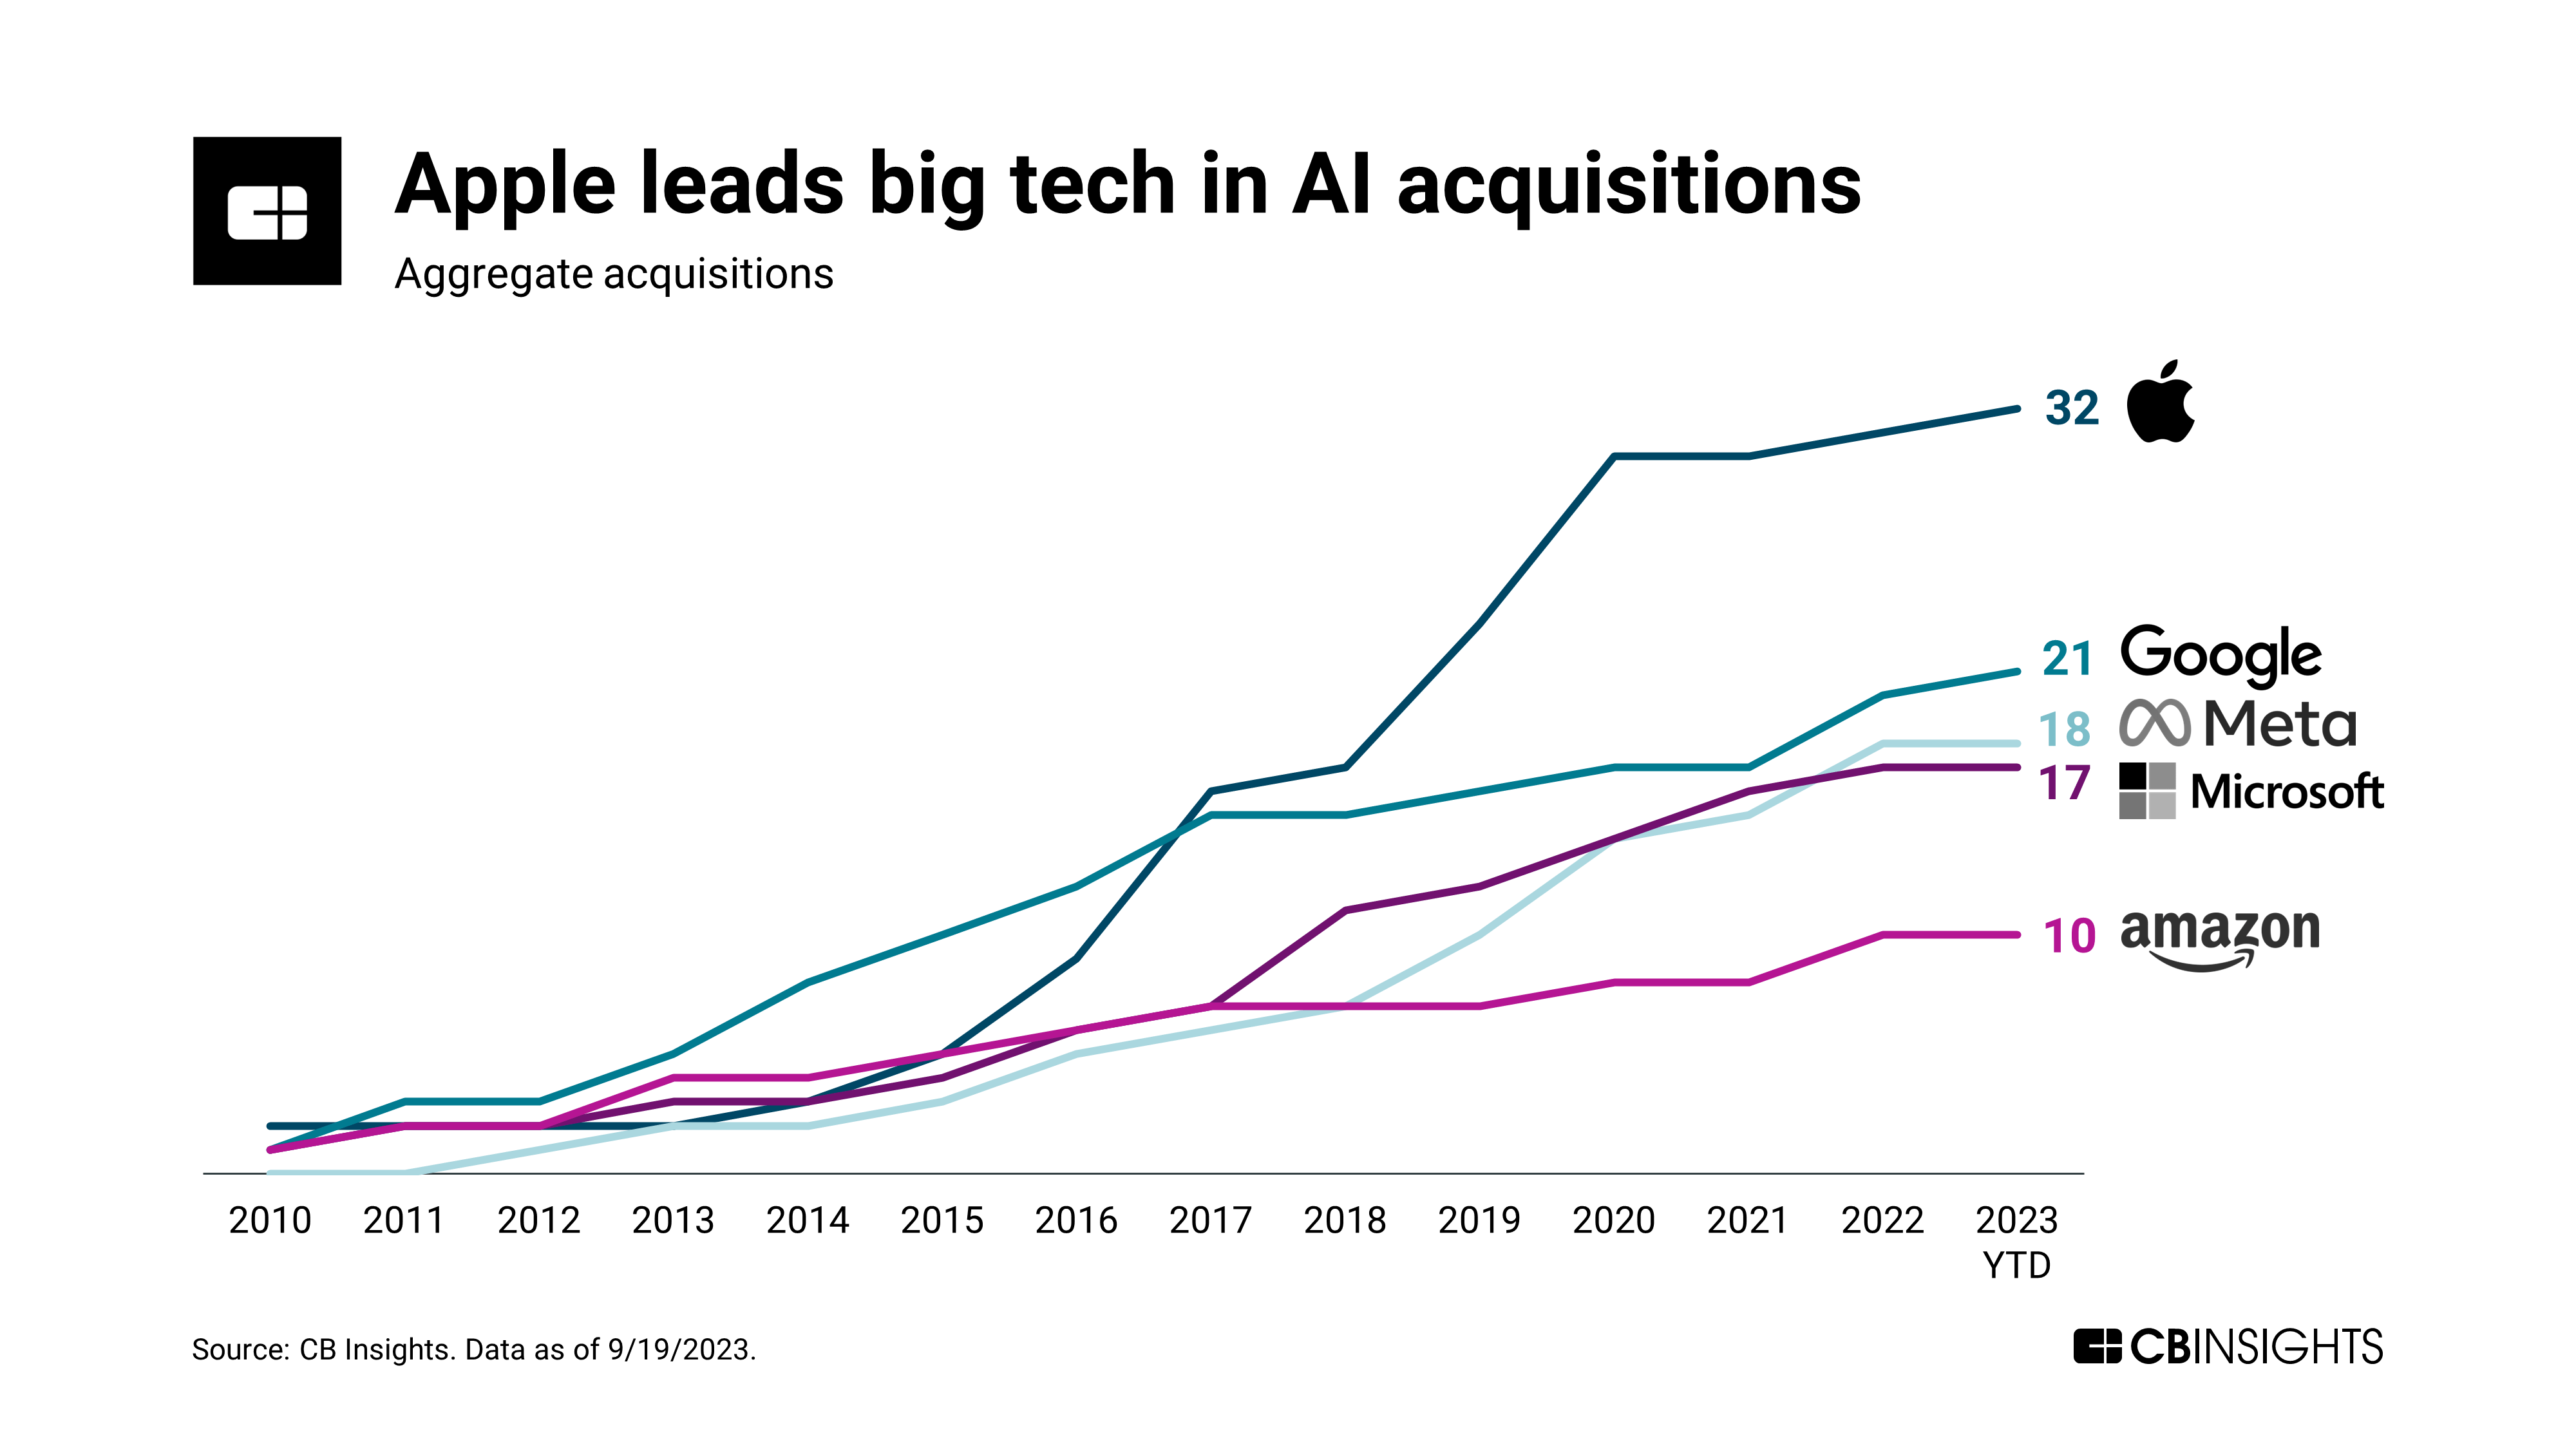 Cash-strapped AI startups seek mergers & acquisitions to survive amid rising costs: Is the AI dream over for startups? - TechStartups